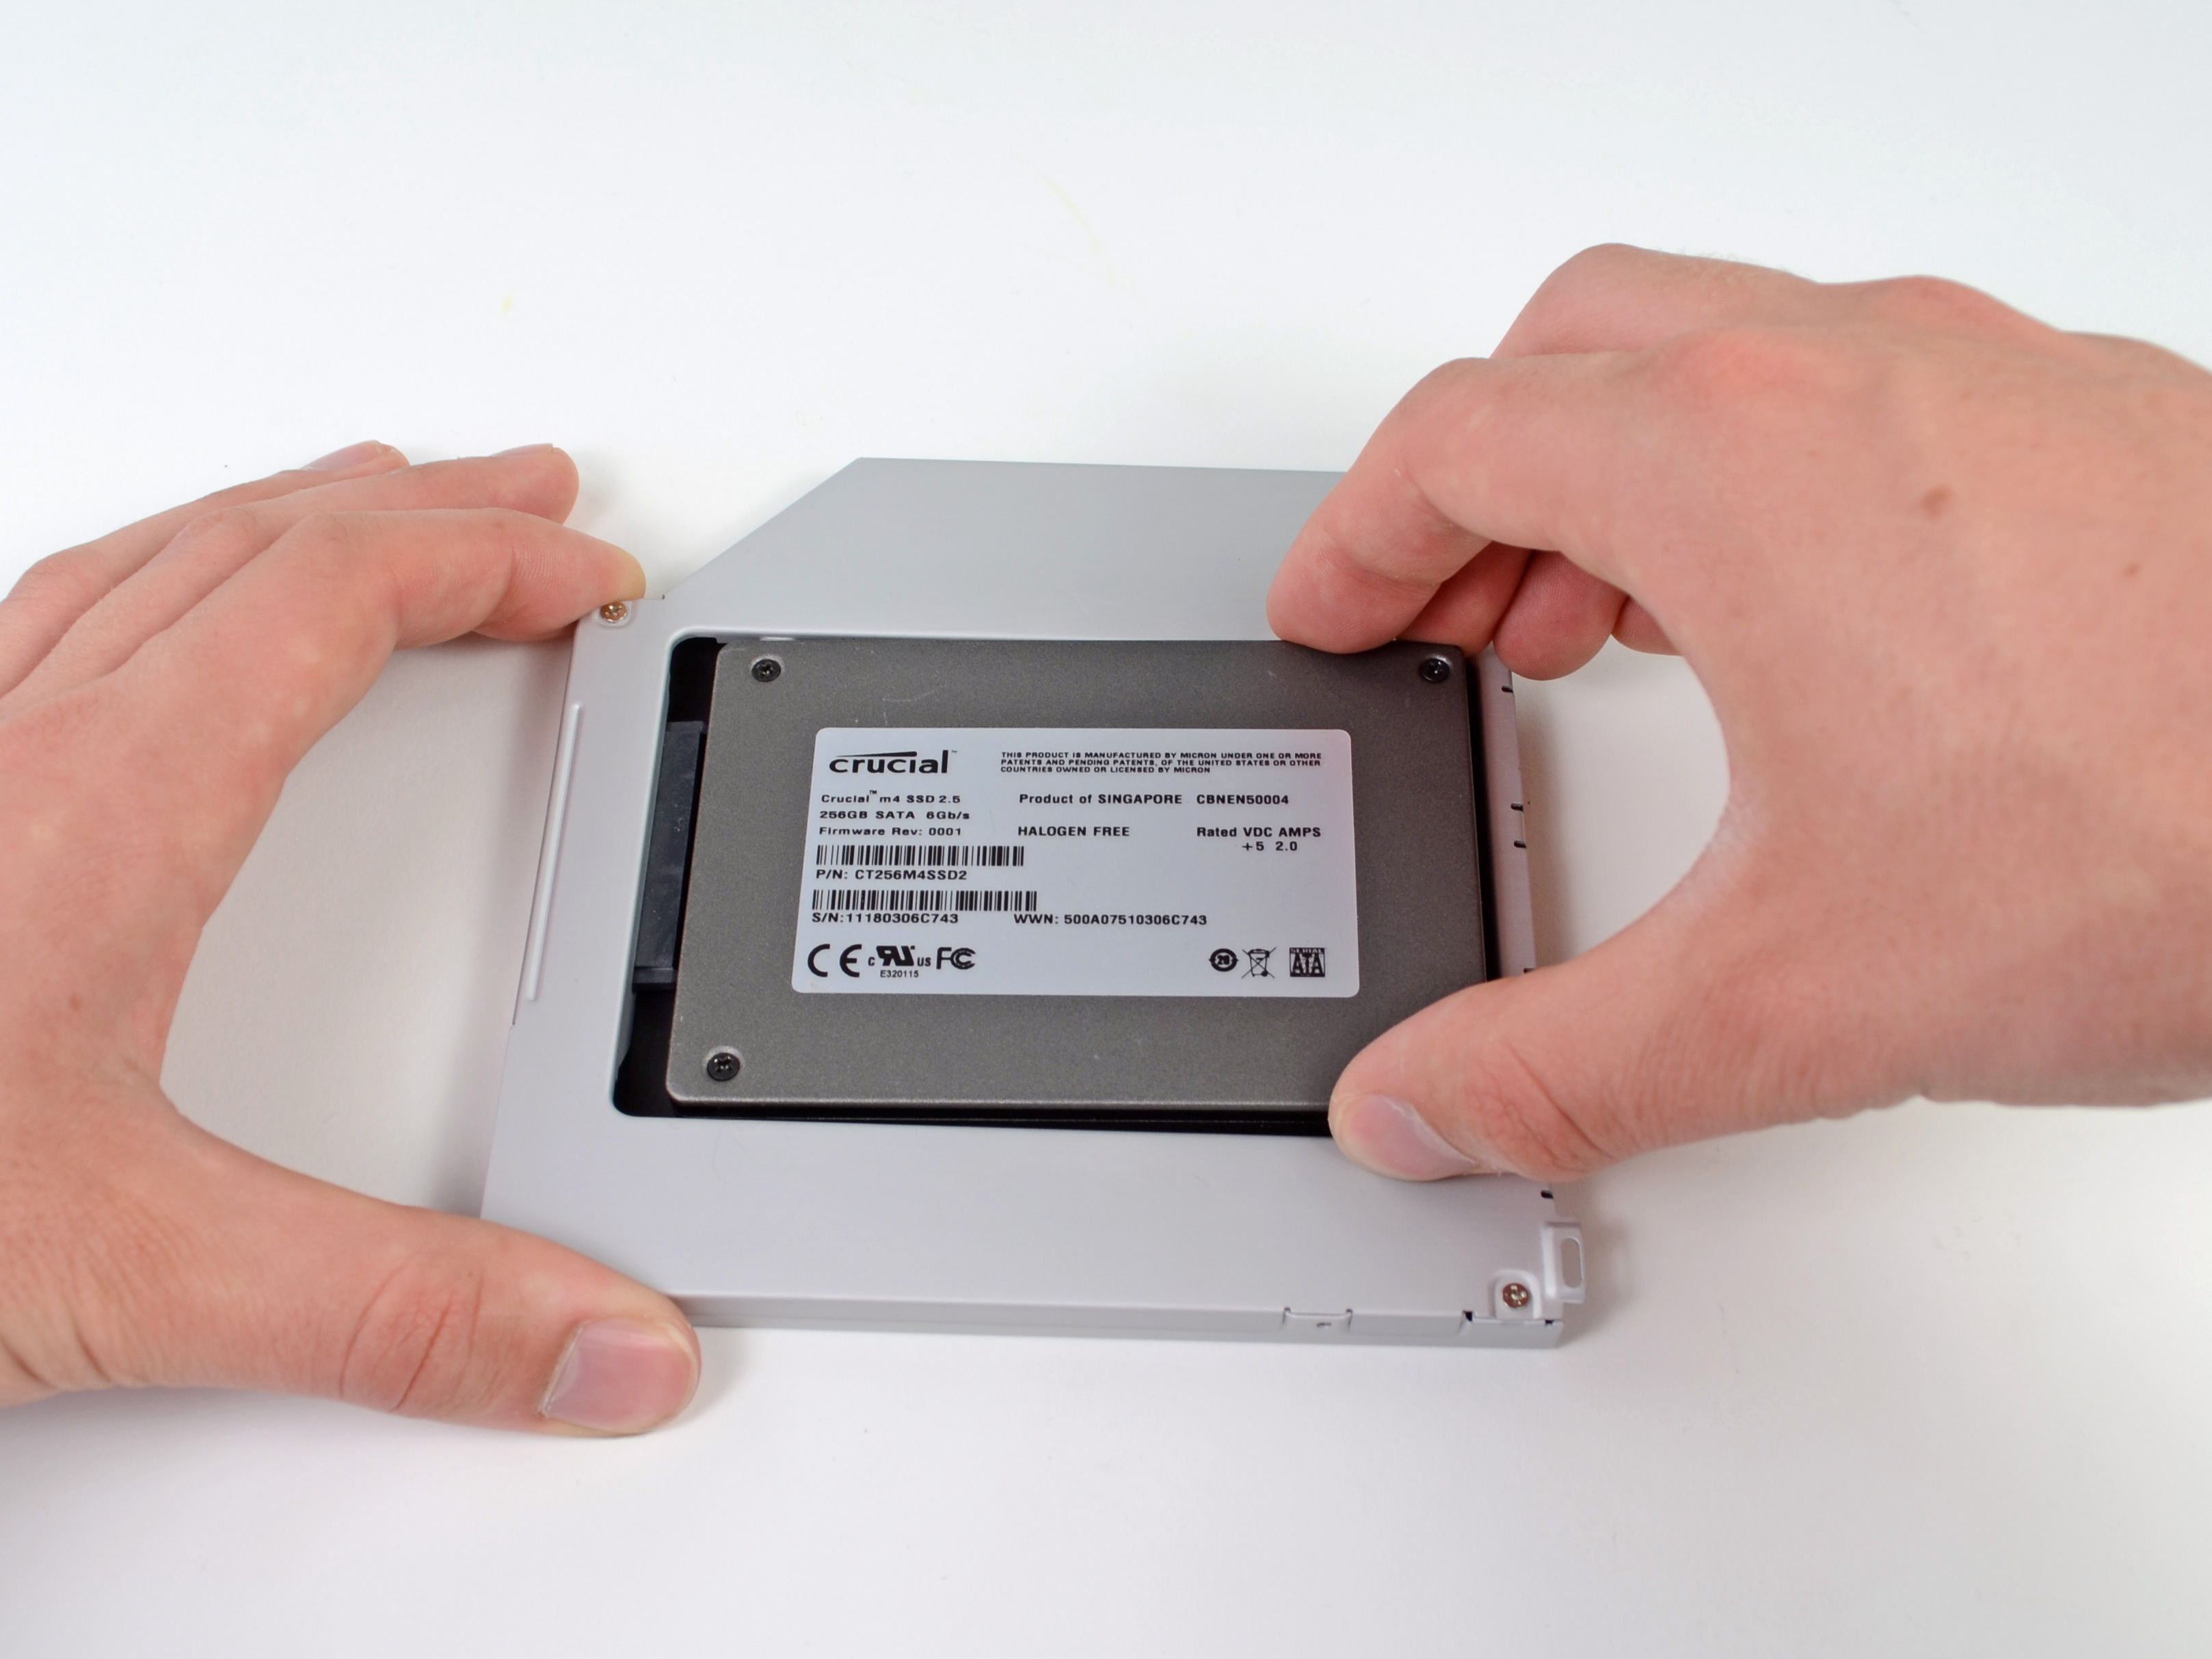 macbook pro hard drive replacement guide